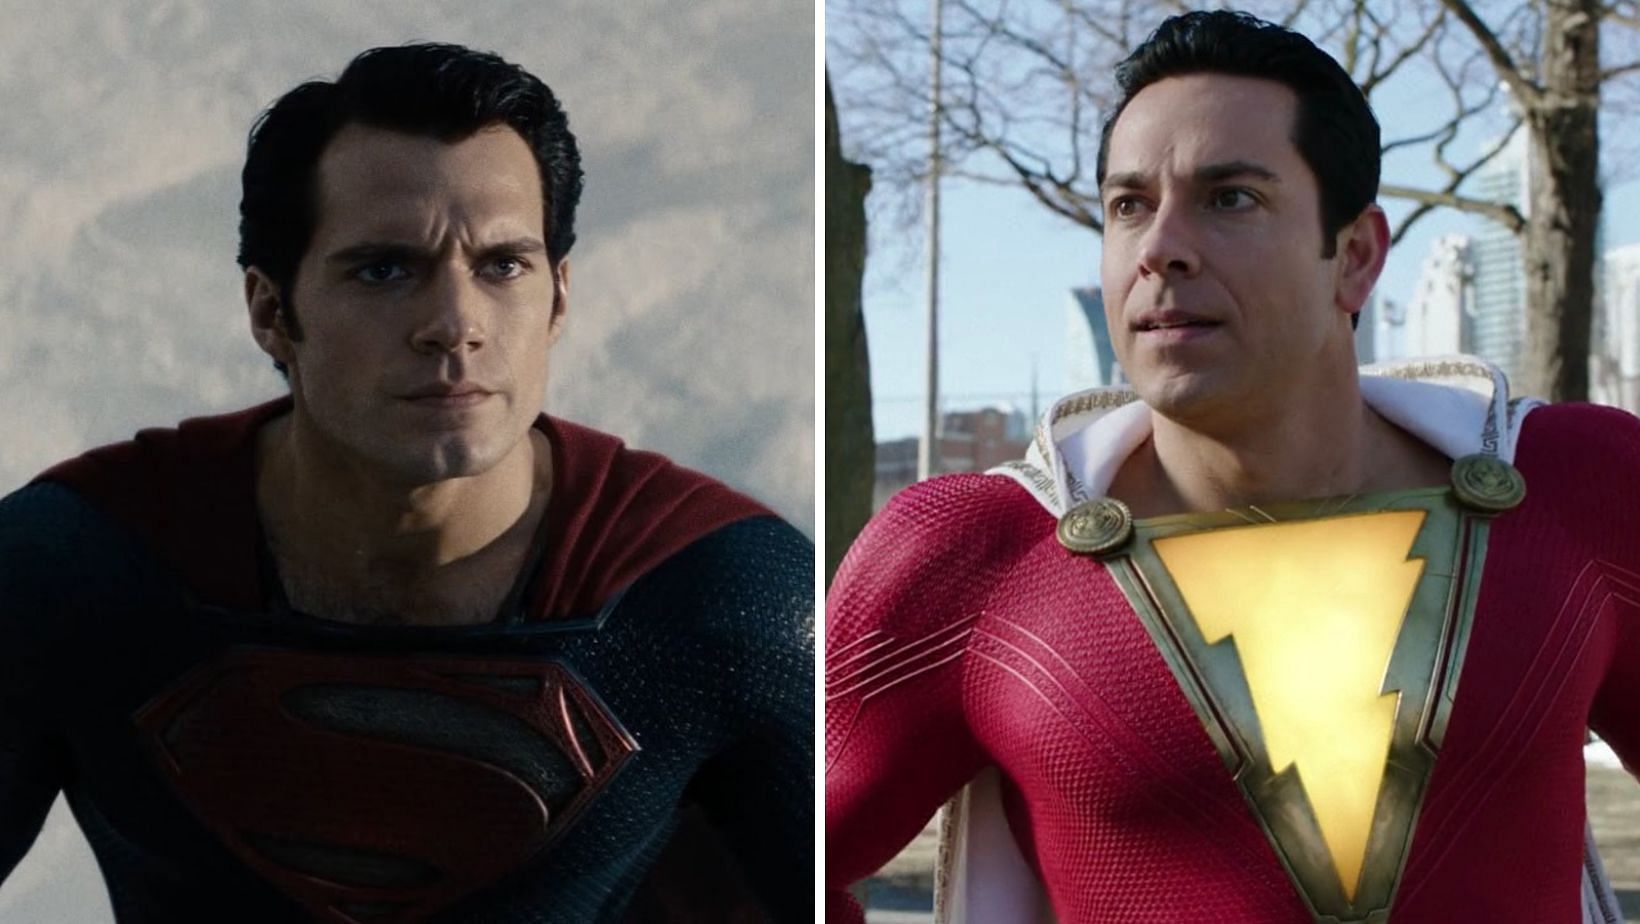 Superman and Shazam, standing face-to-face, ready to engage in an epic battle that will determine who reigns supreme in the world of DC Comics (Image via DC Studios)